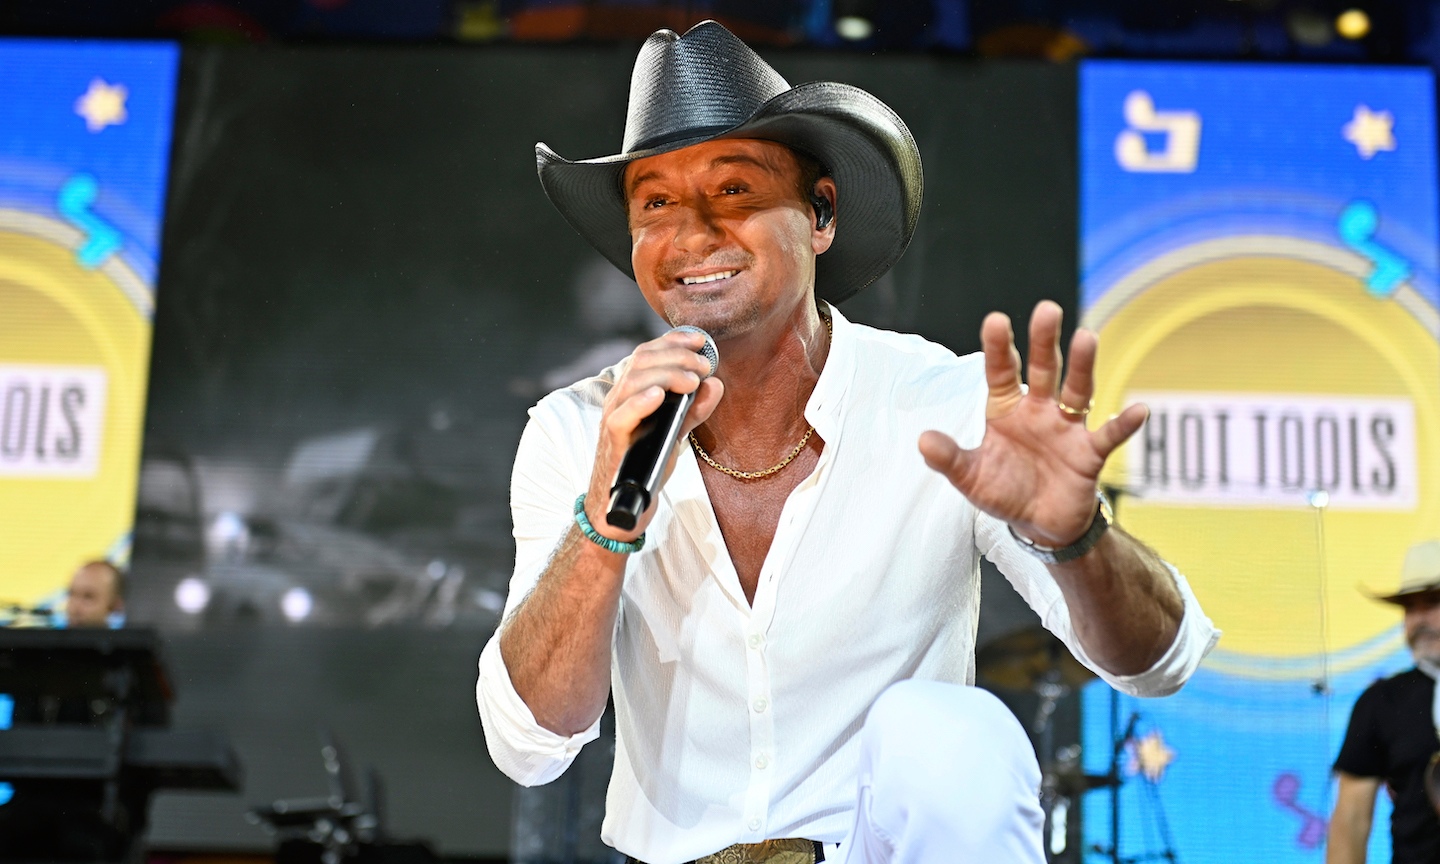 Ever Wonder Where Tim McGraw Got His Good Looks From?